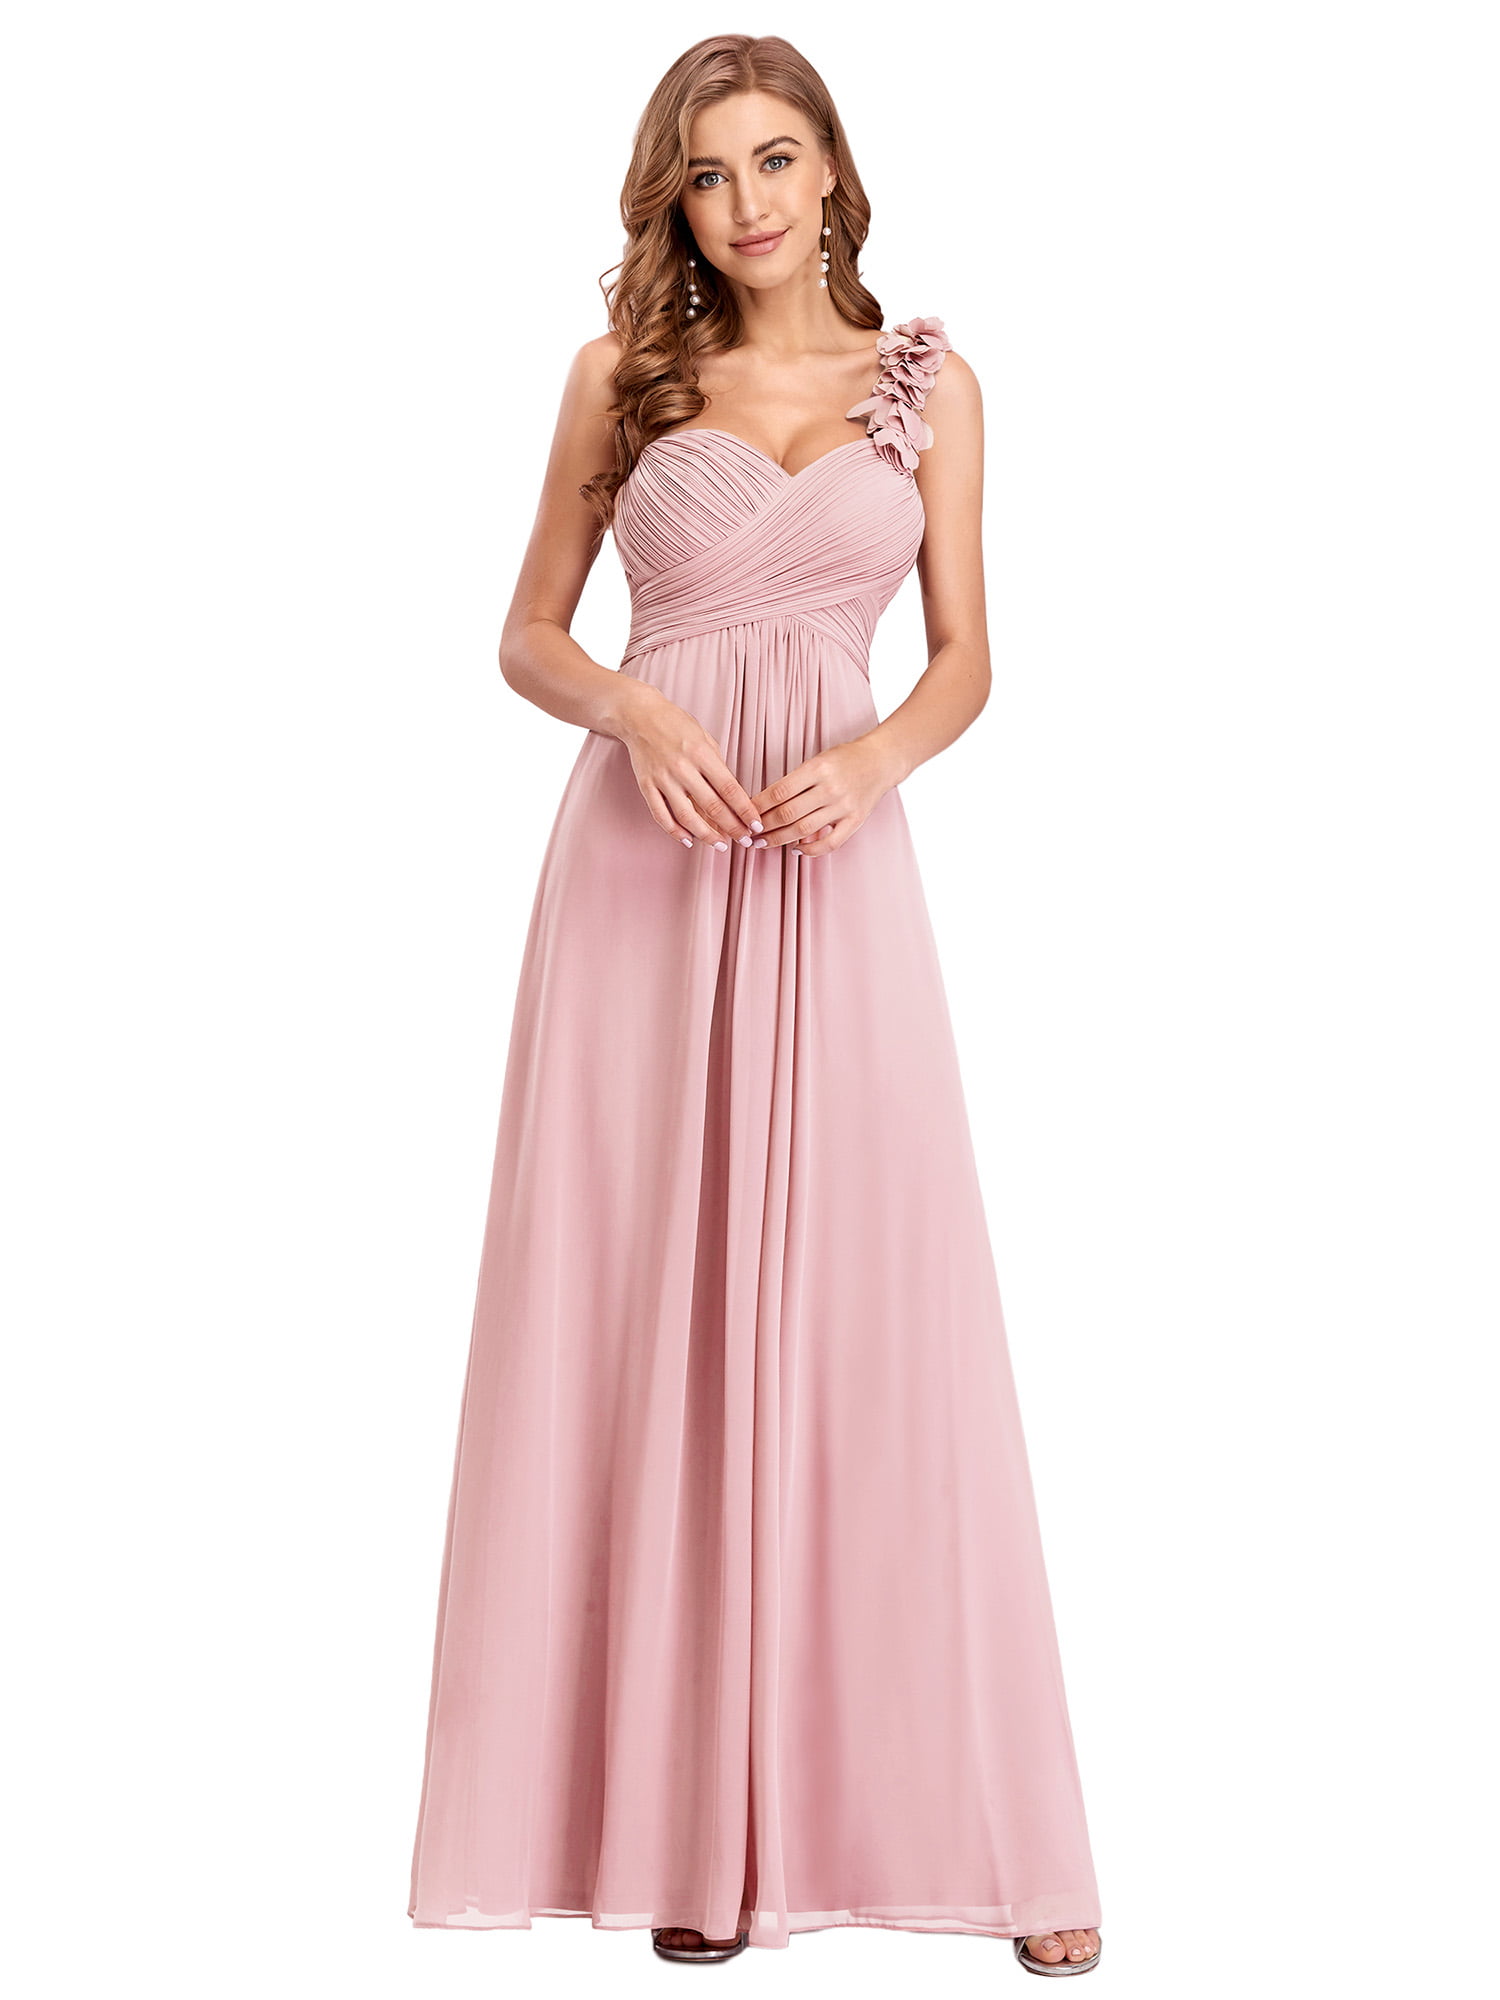 Ever-Pretty US A-Line Evening Dress One Shoulder Hot Pink Cocktail Gowns 08237 